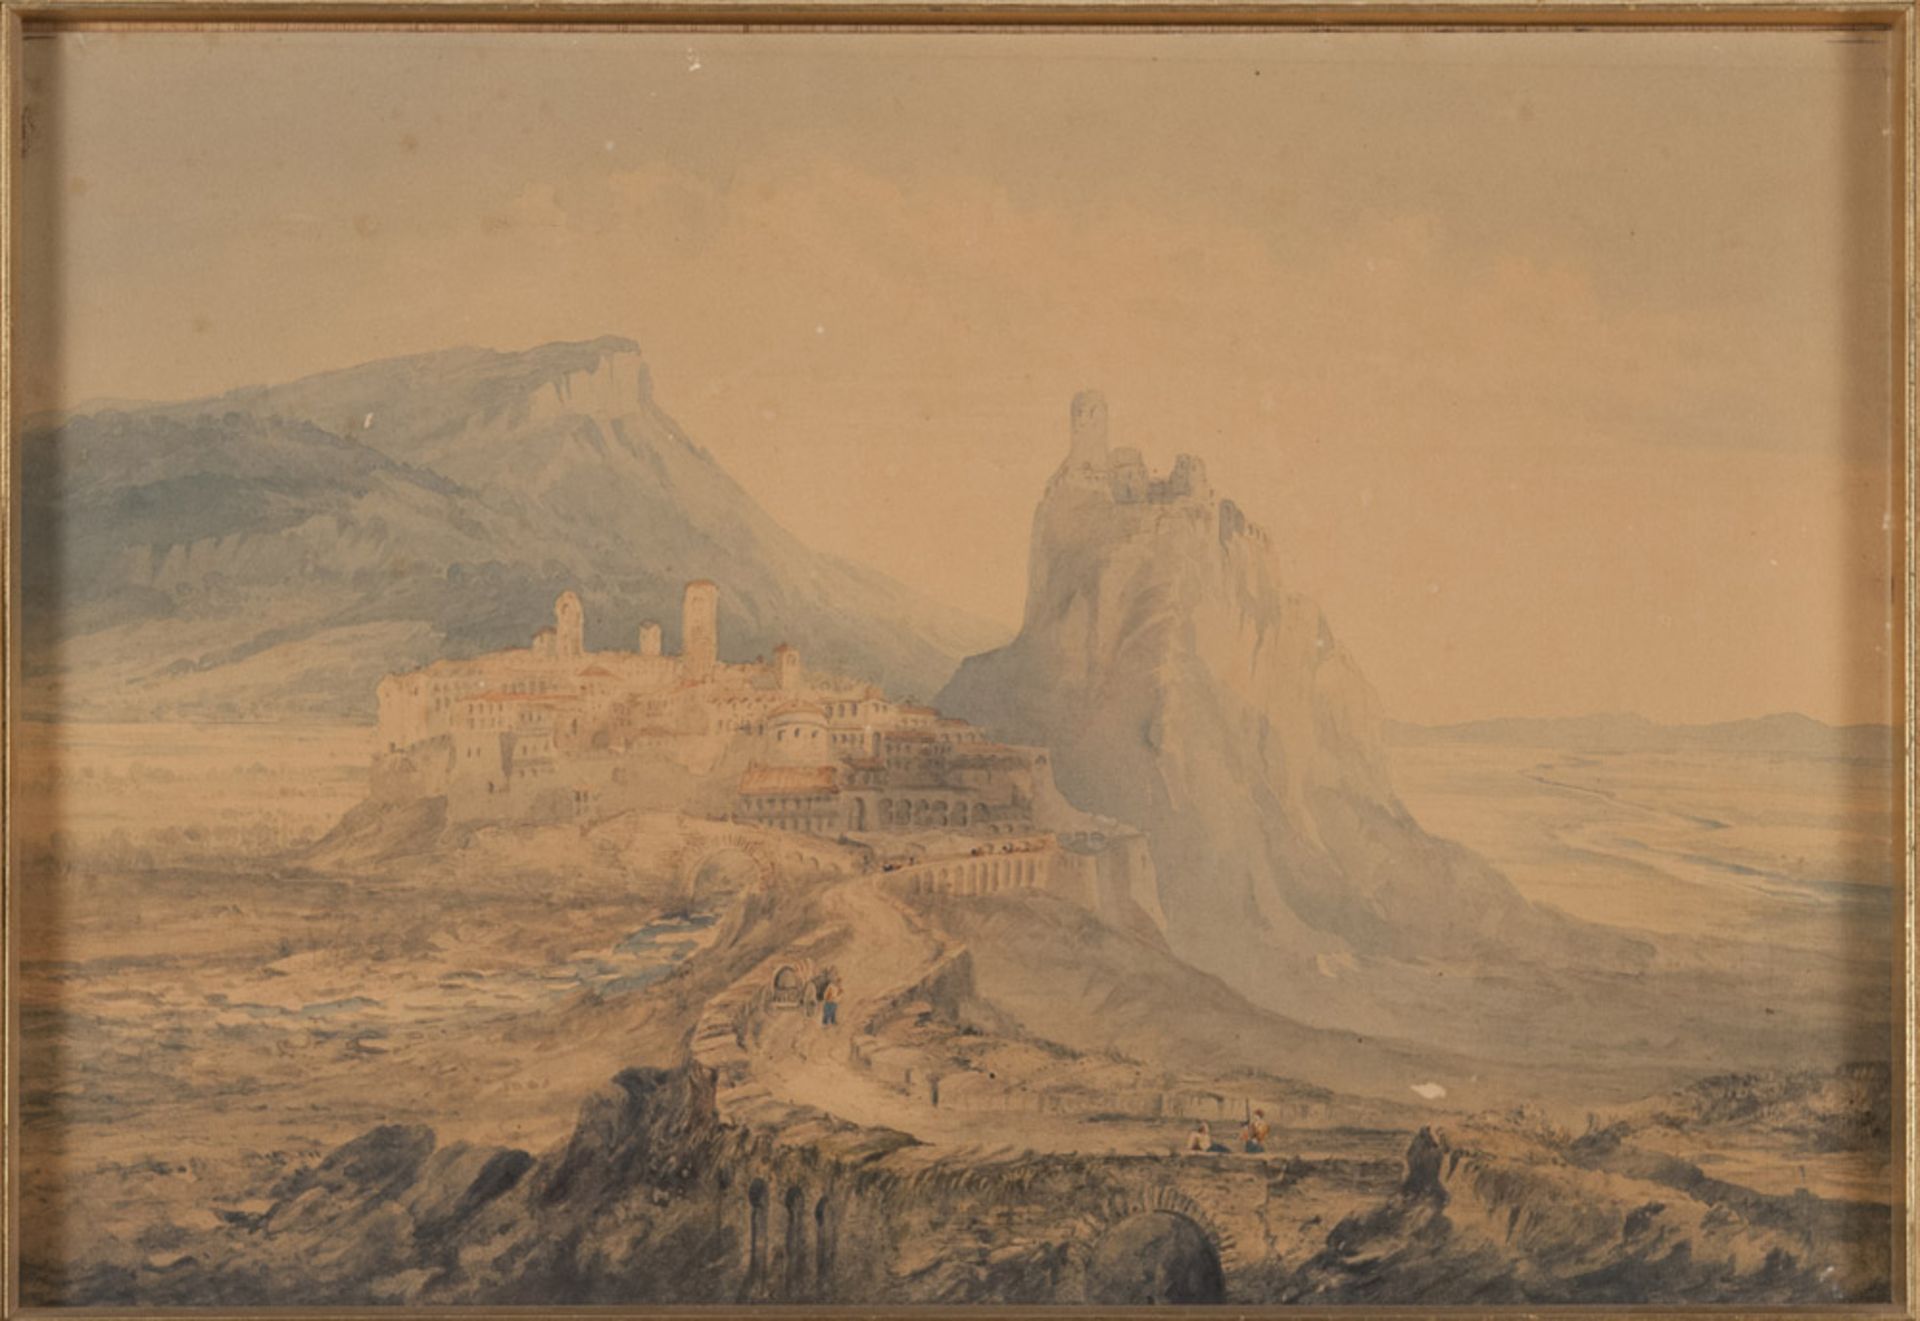 ITALIAN PAINTER, 19TH CENTURY LANDSCAPE WITH VIEW OF BAGNOREGIO Watercolor on cardboard, cm. 38 x 56